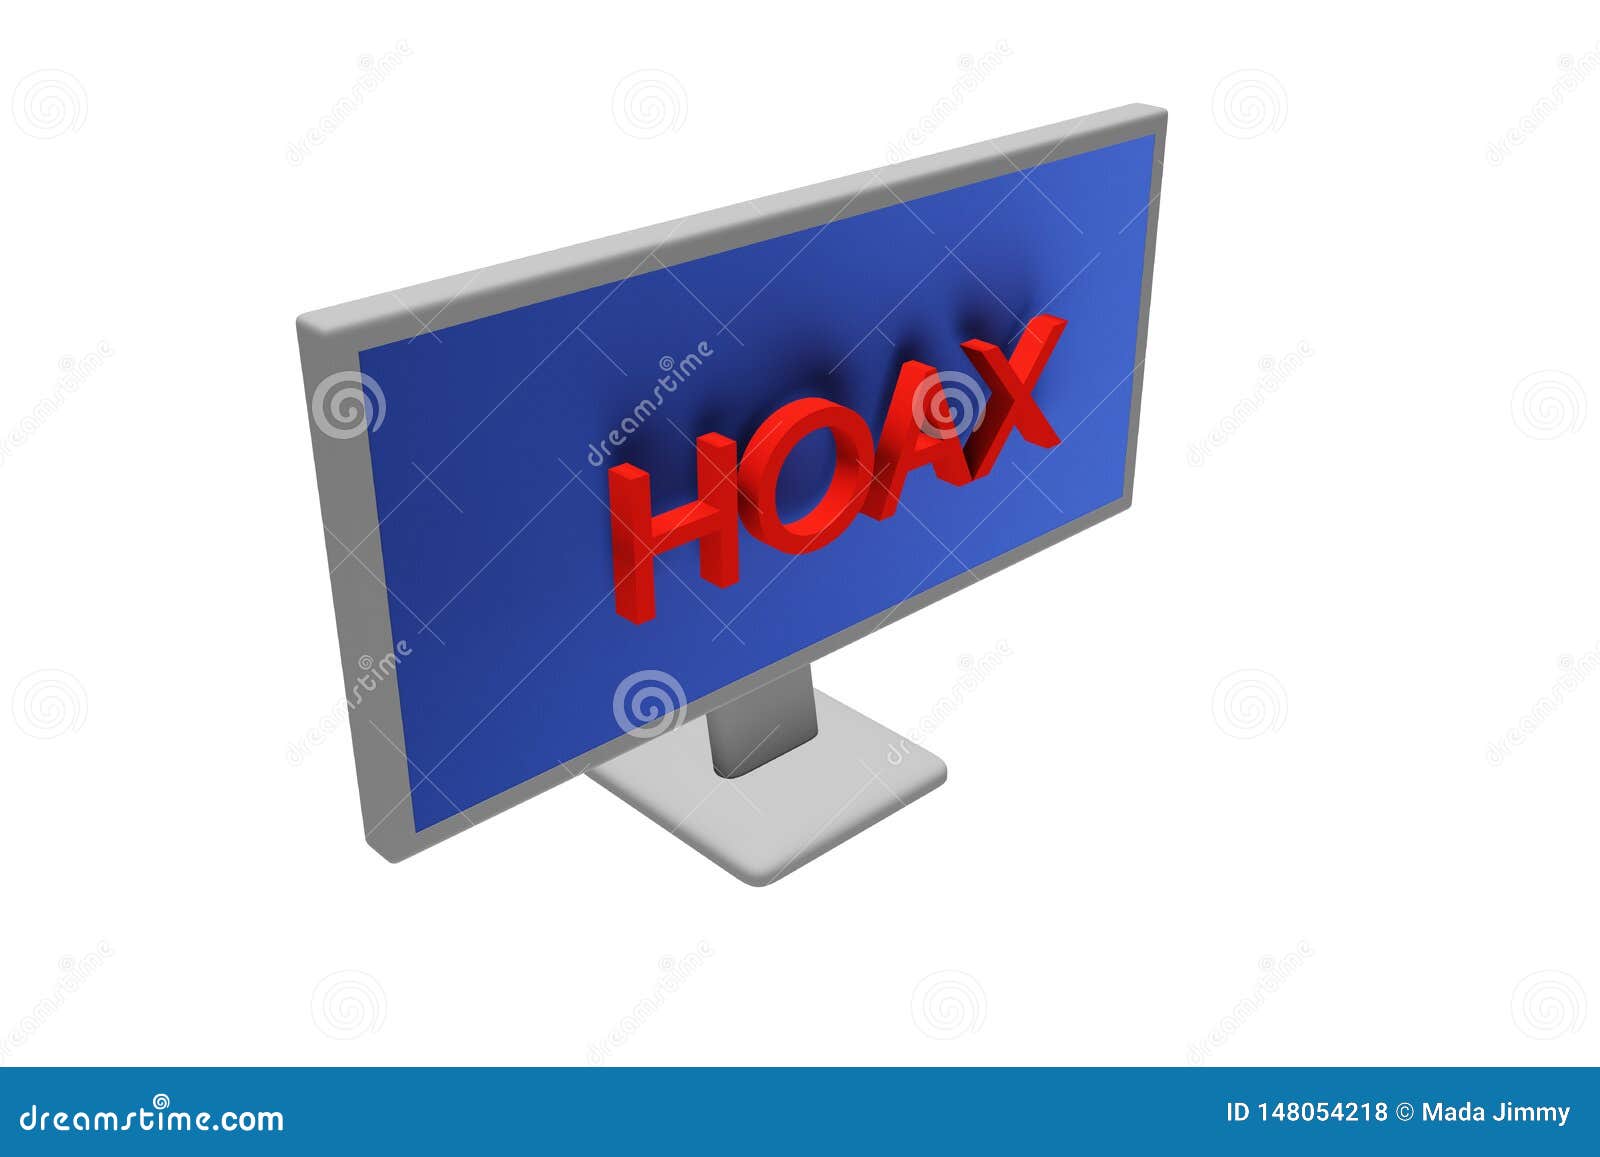 hoax text from monitor 3d model